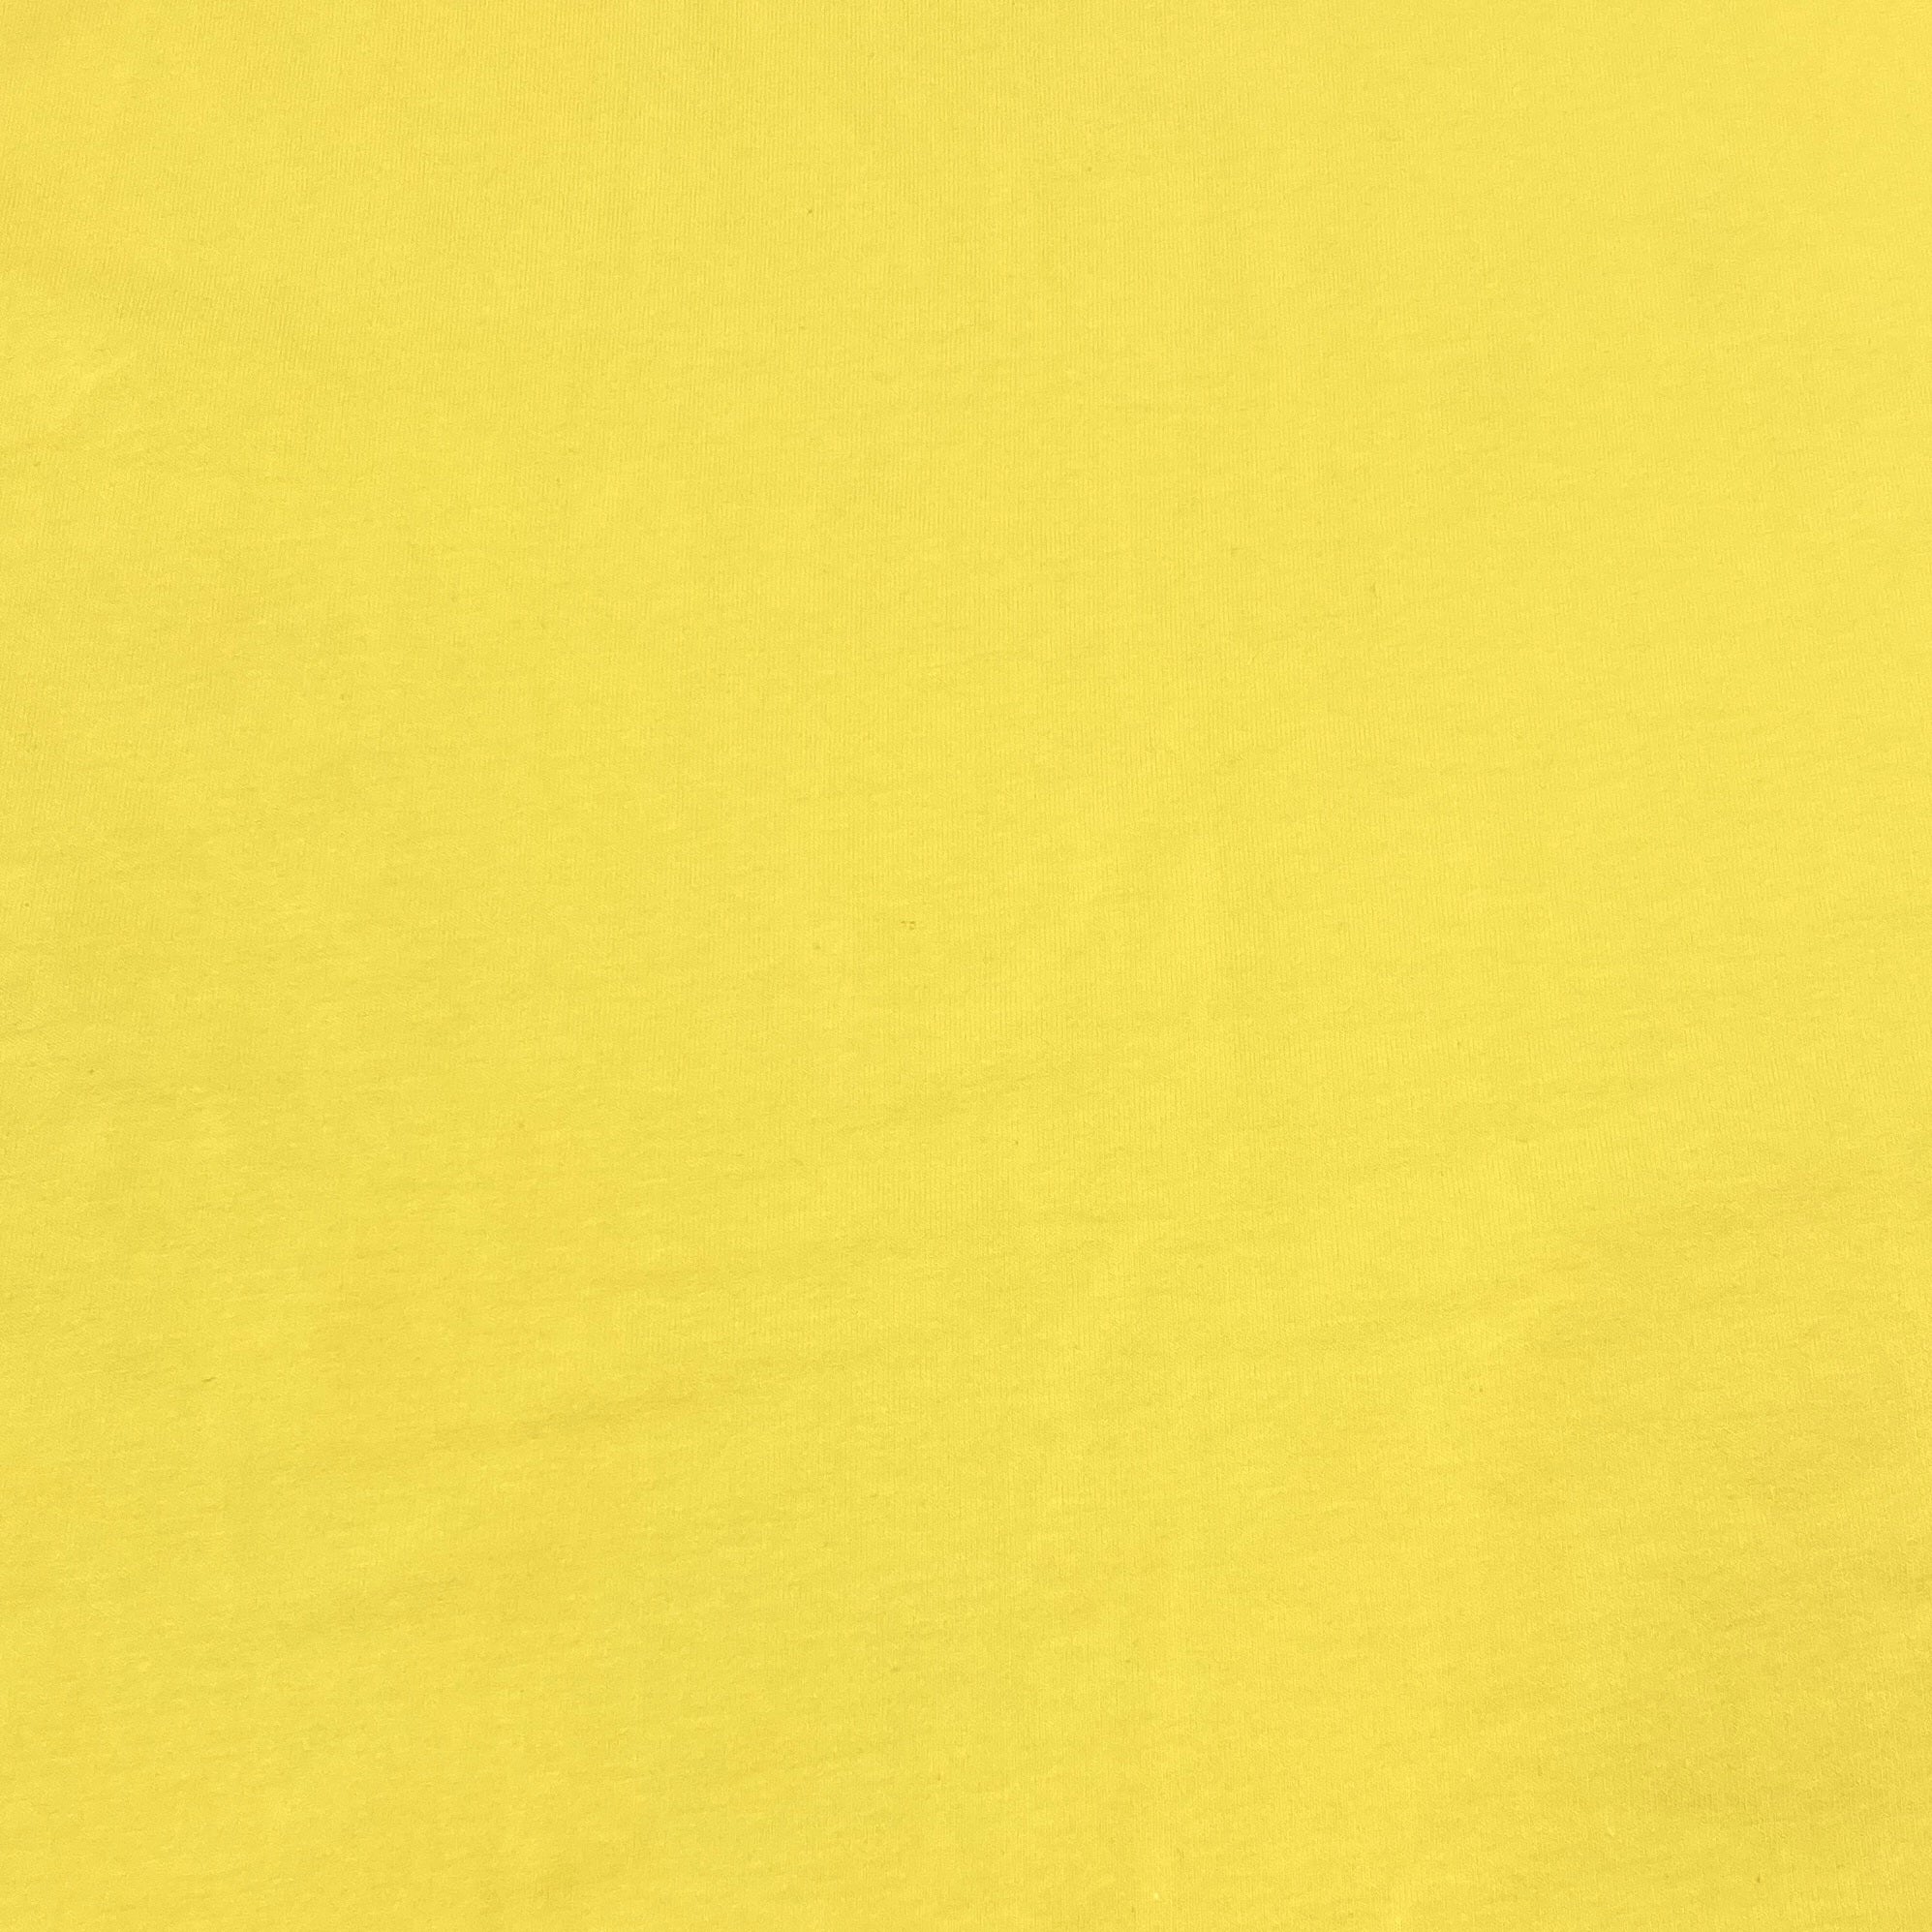 Solid Bright Yellow 4 Way Stretch 10 oz Cotton Lycra Jersey Knit Fabric